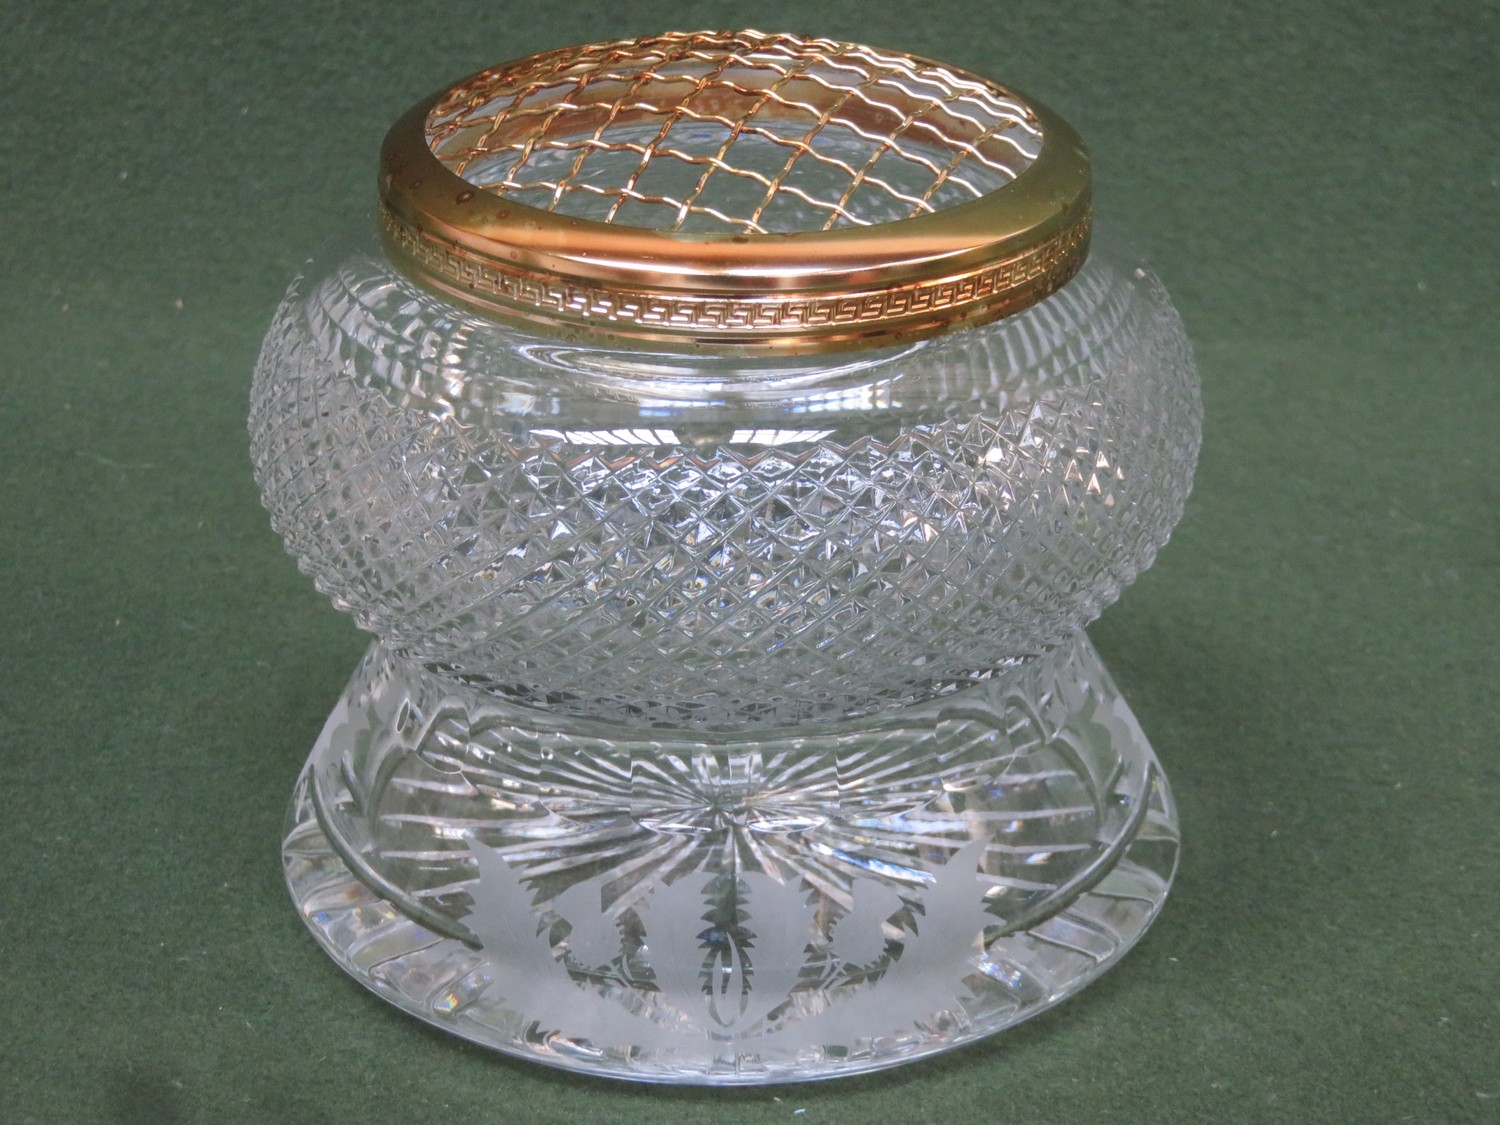 Edinburgh crystal etched thistle pattern Rose Bowl with gilt cover. Approx. 13cm H x 14cm Diameter.